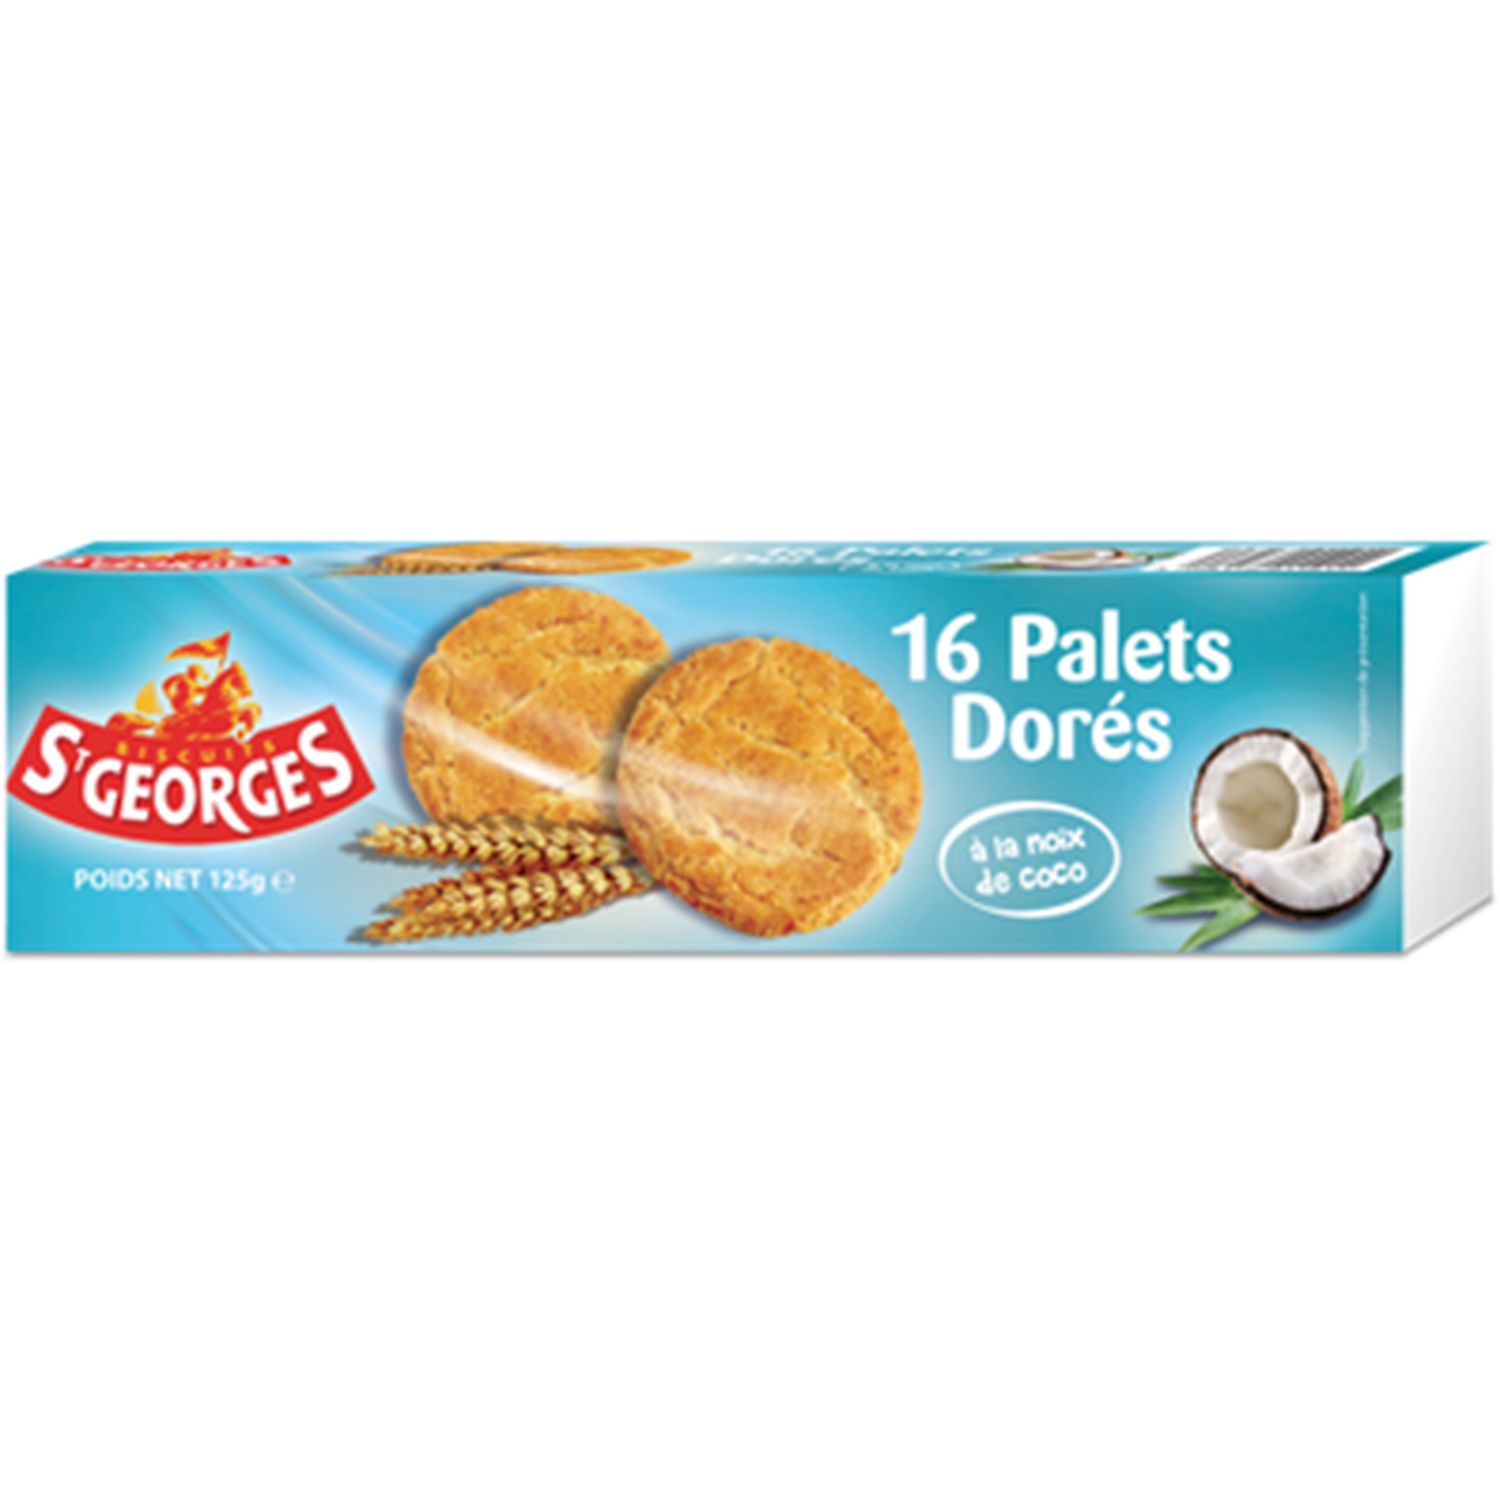 Mon Gouter, St Georges (3 x 25 biscuits)